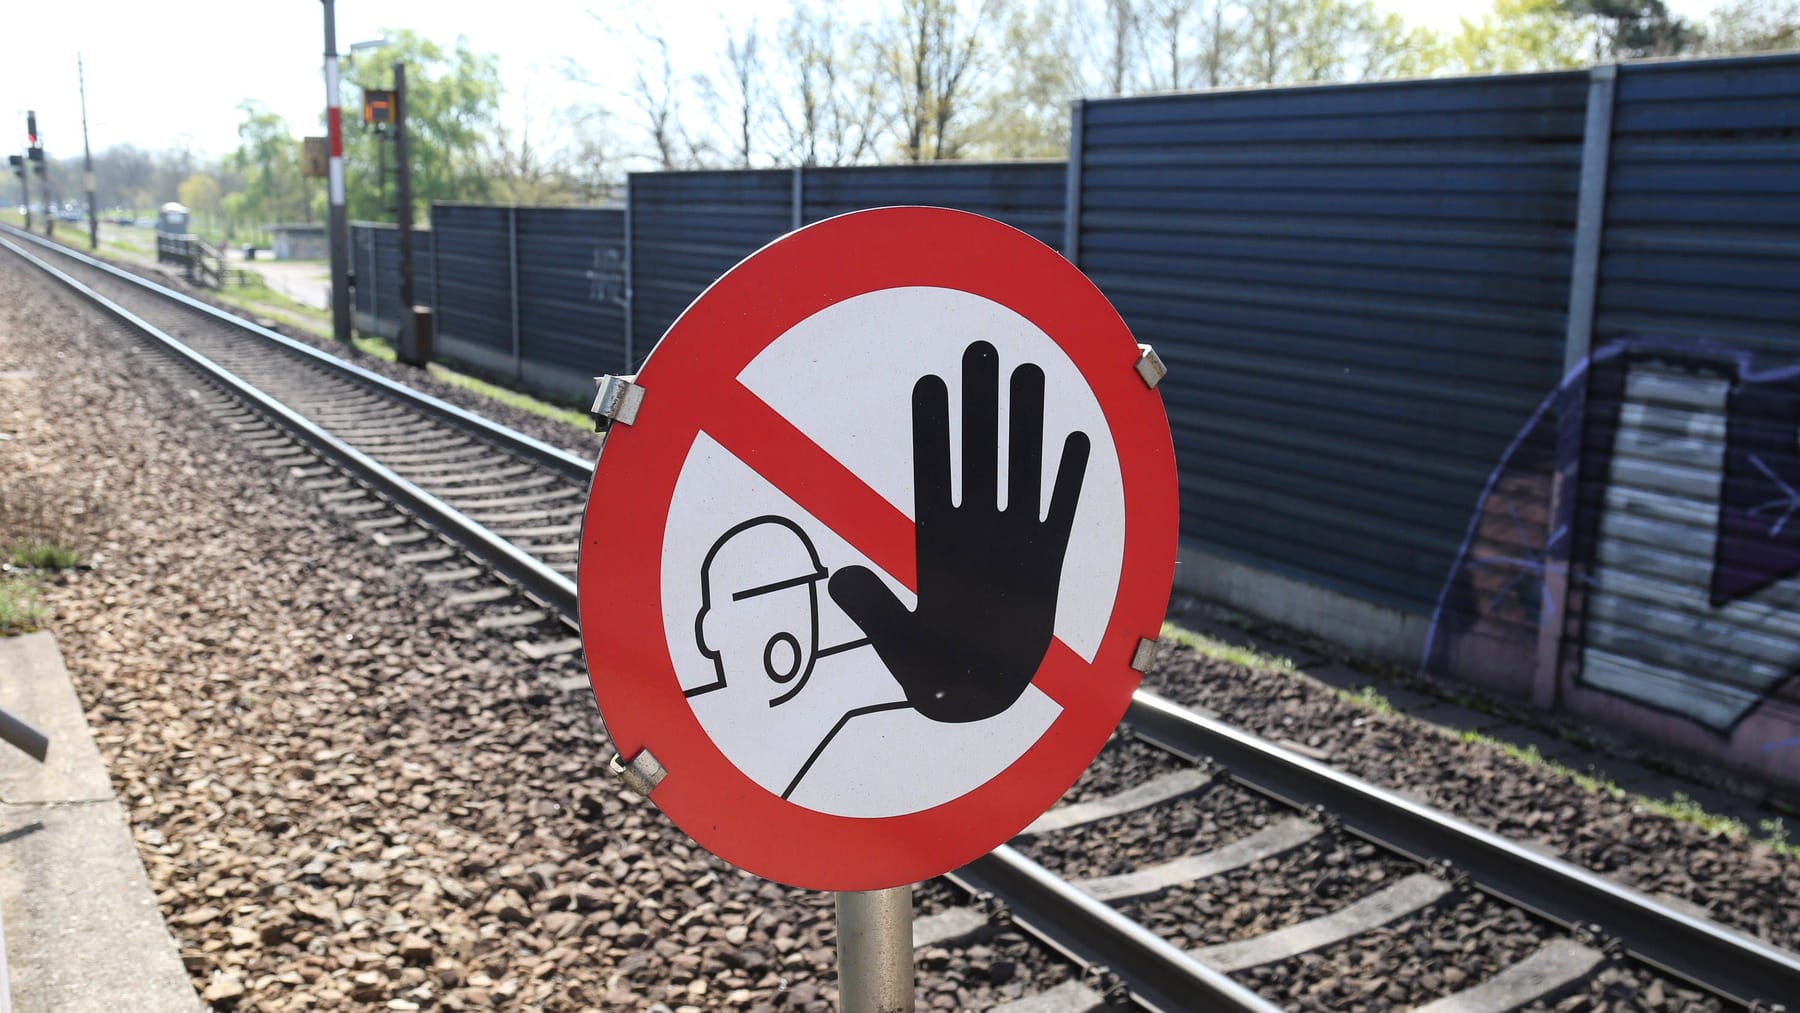 Train accident in Hürth: tracks were not released for construction work